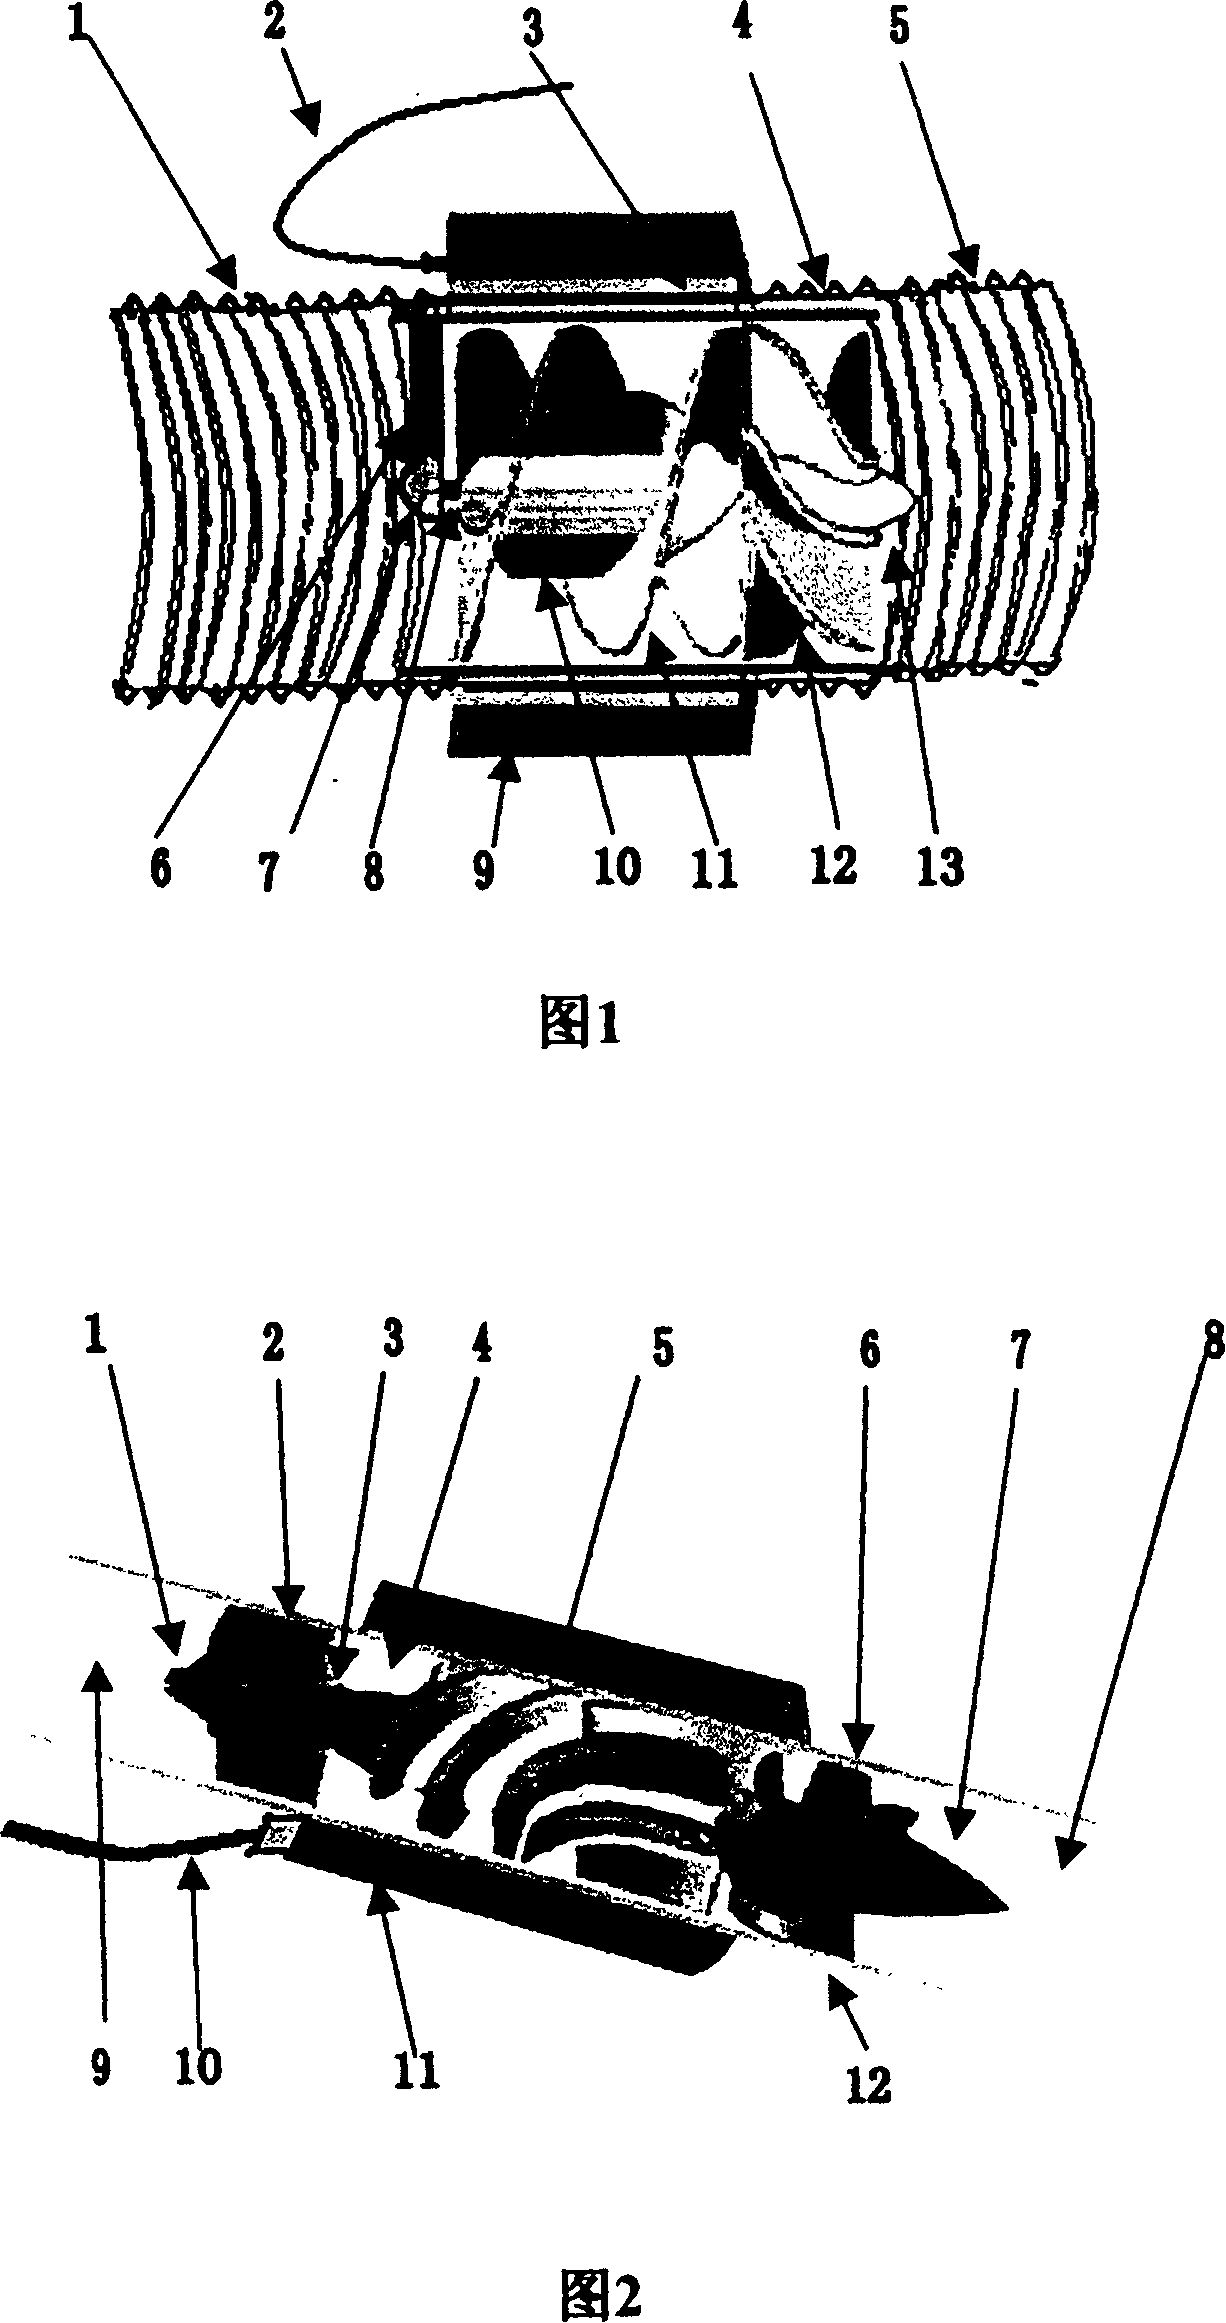 Sleeved type permanent magnetic impeller axial flow type blood pump for assisting heart and assisting method